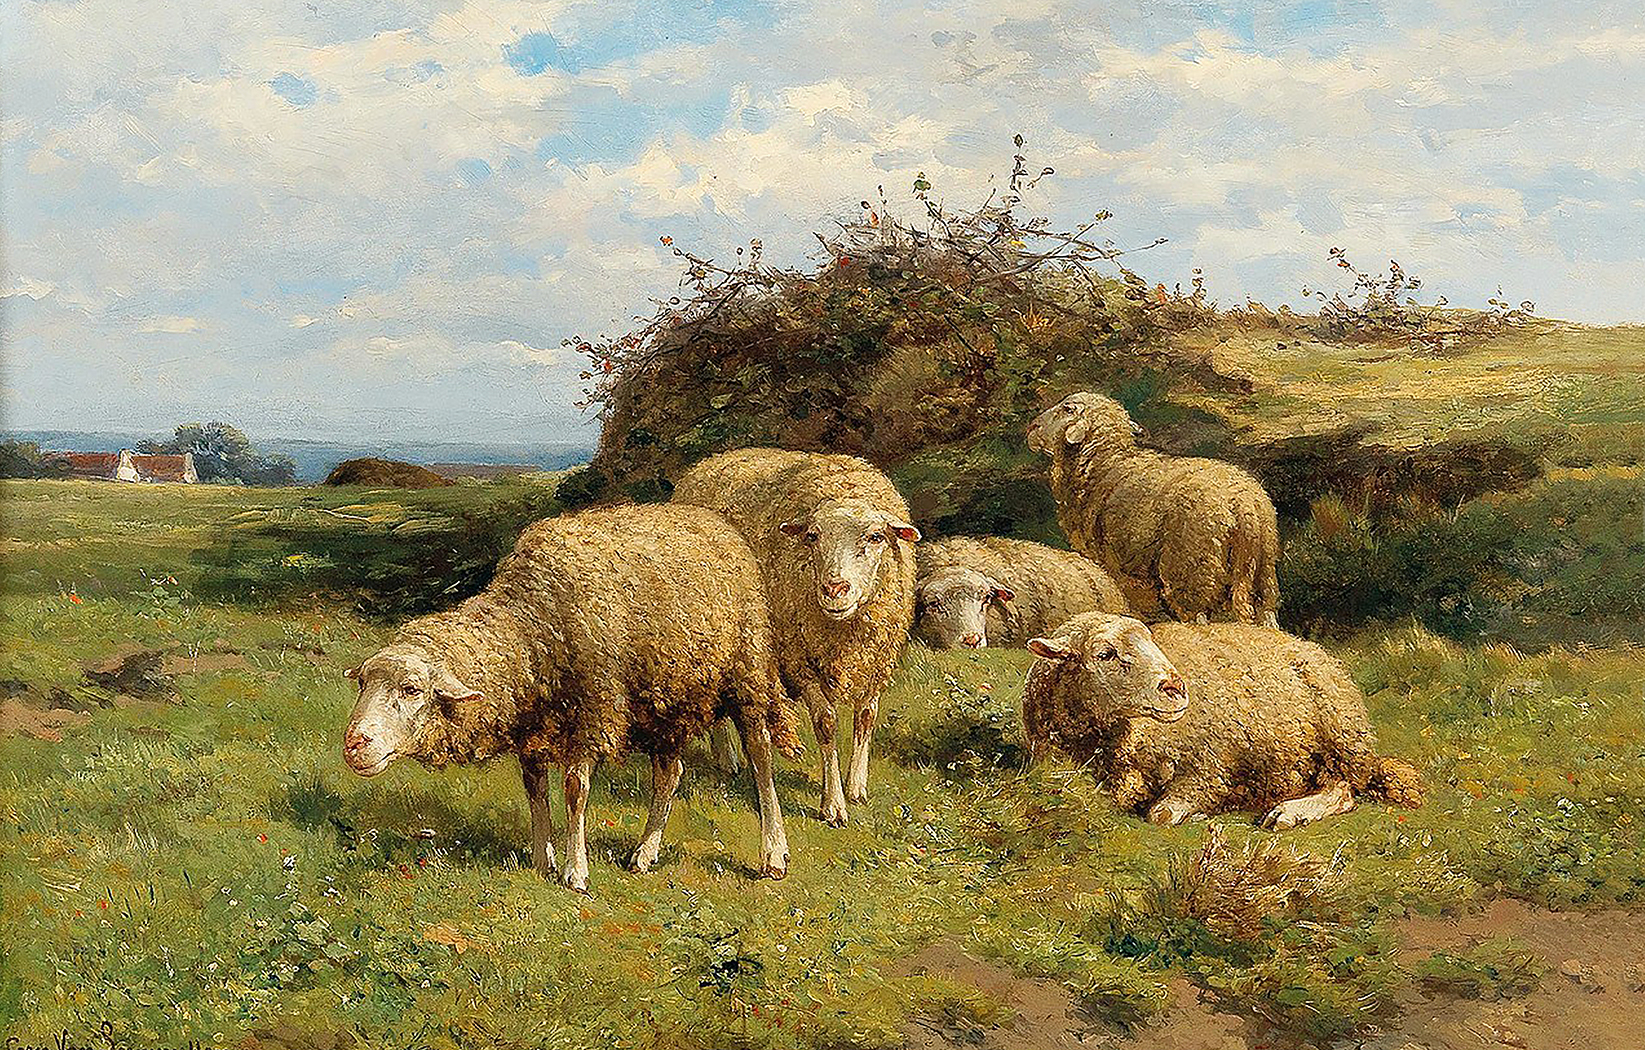 Farm/Pastoral Farm Sheep in Country Field Framed Oil Pain ...